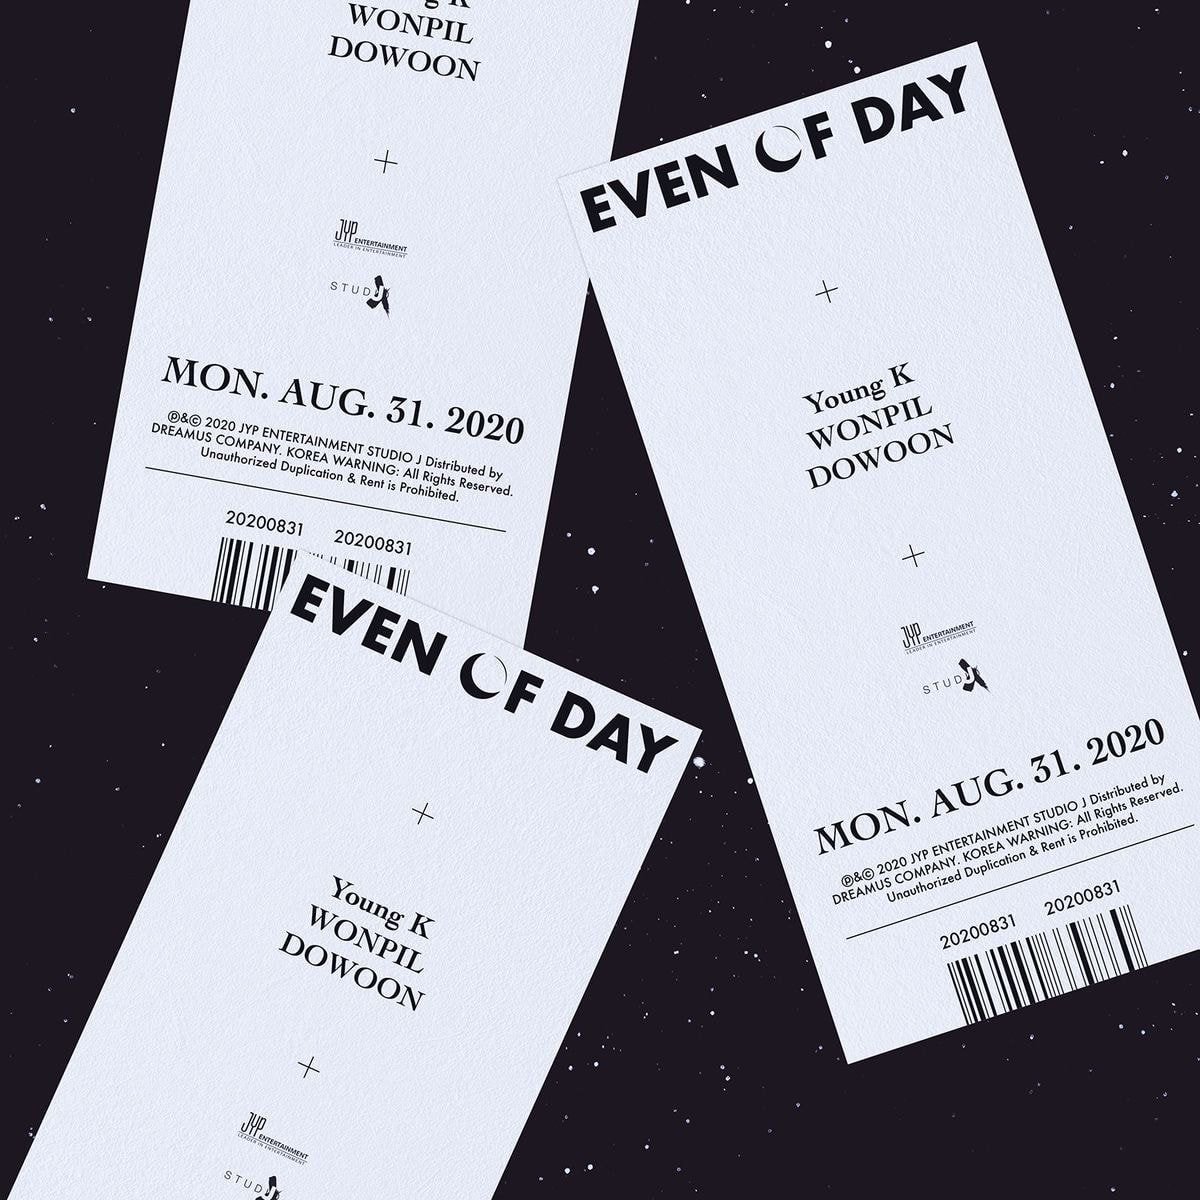 Invitation from DAY6 (Even of Day) 2020.08.31 (MON) 6PM